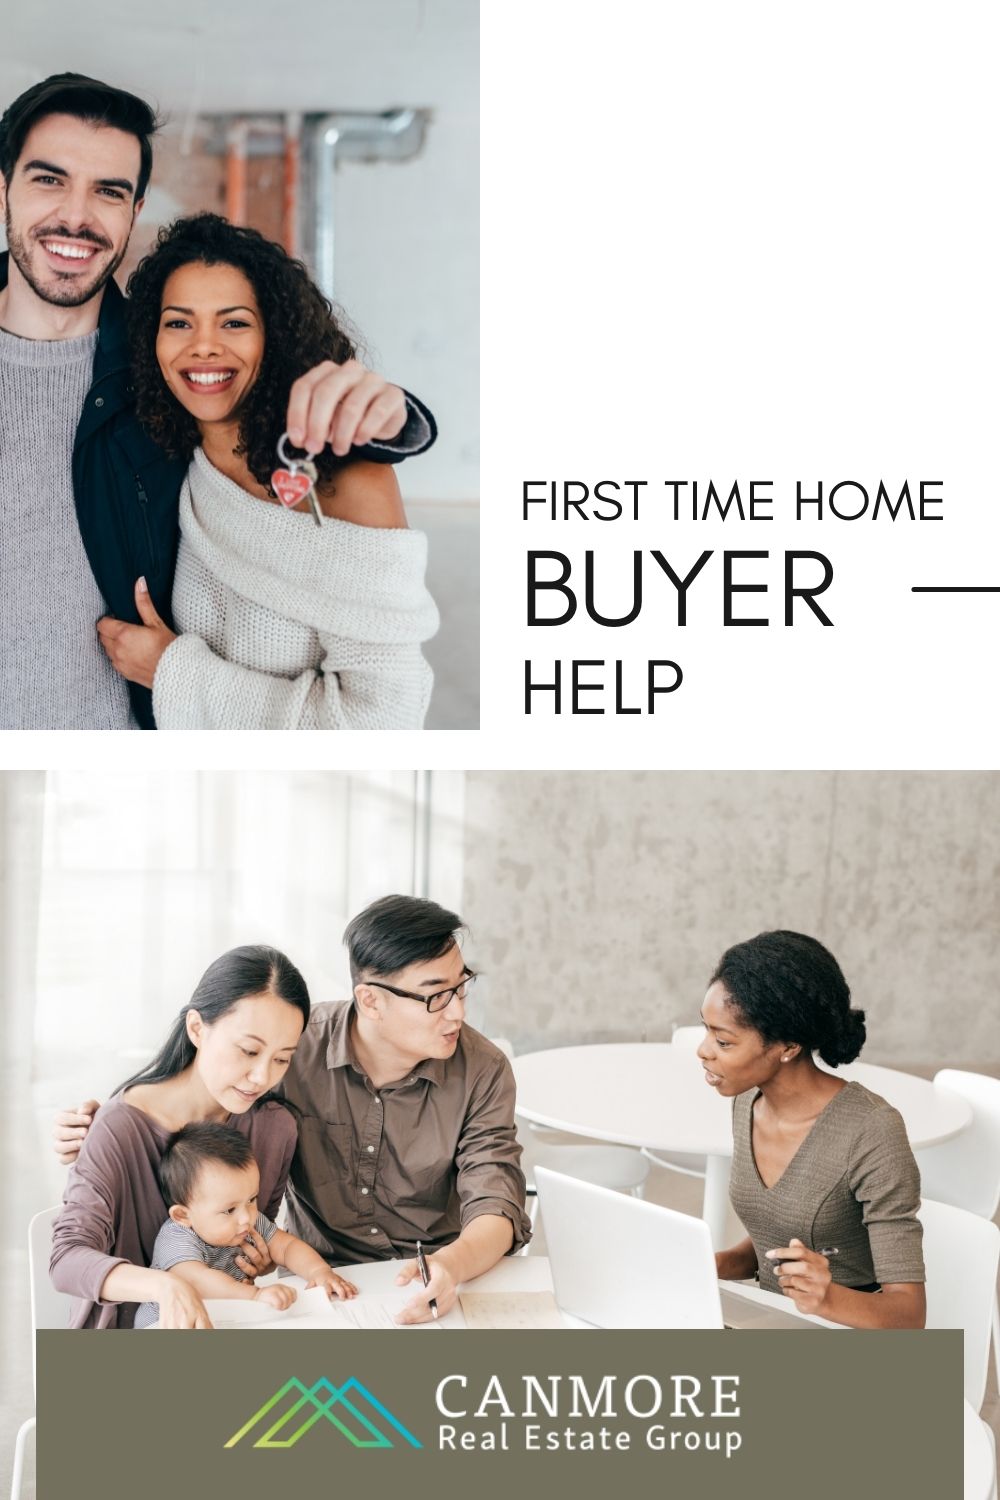 Buying Your First Home in Canmore, AB